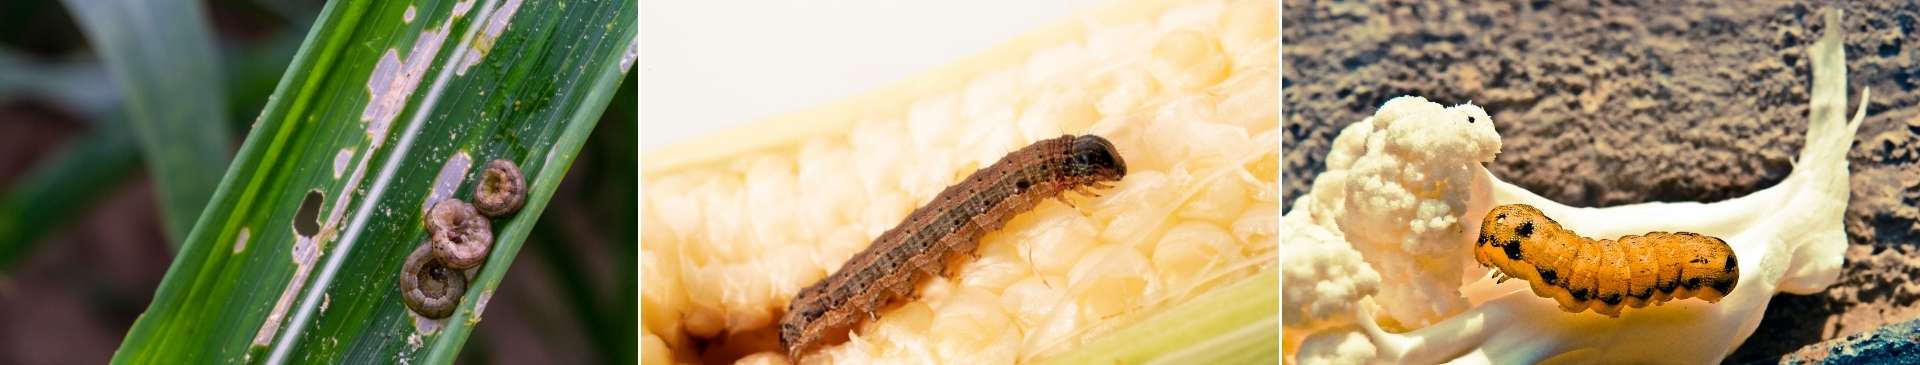 Armyworms: Preventing and Controlling Their Damage